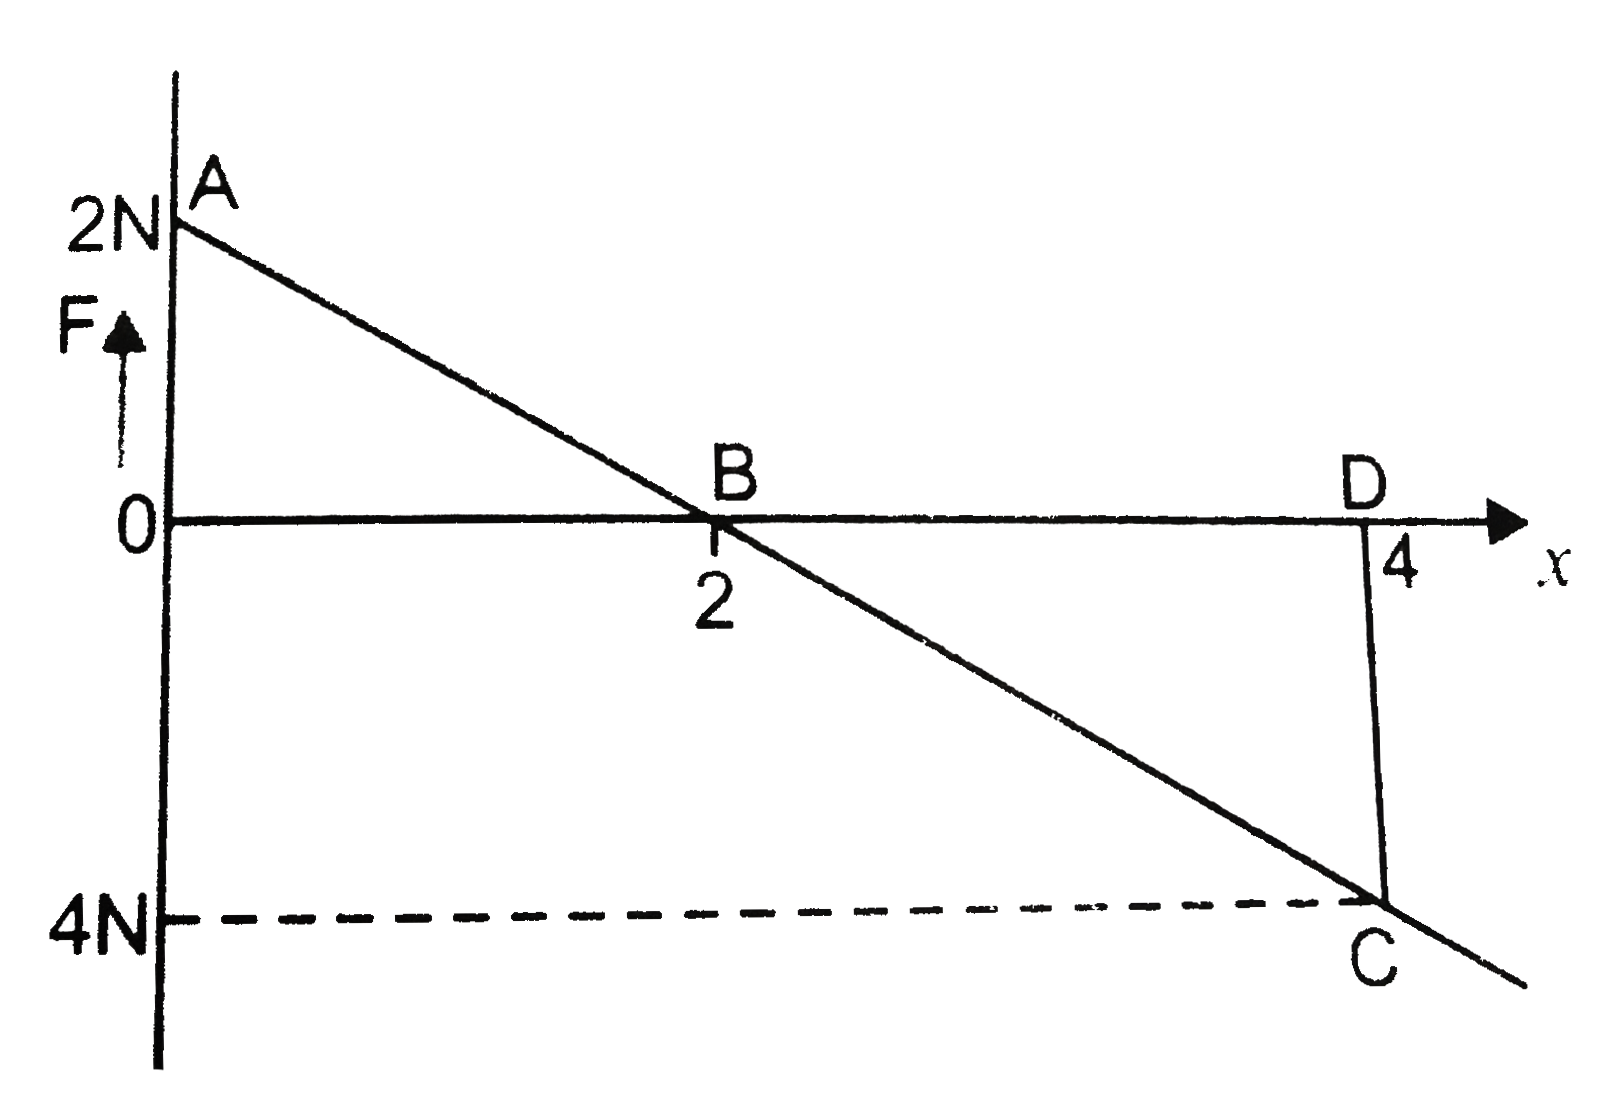 The variation of force acting on a body with the displacement of body is shown in figure. Calculate work done by the force in the interval   (i) 0le x lem (ii) 2m le x le 4m